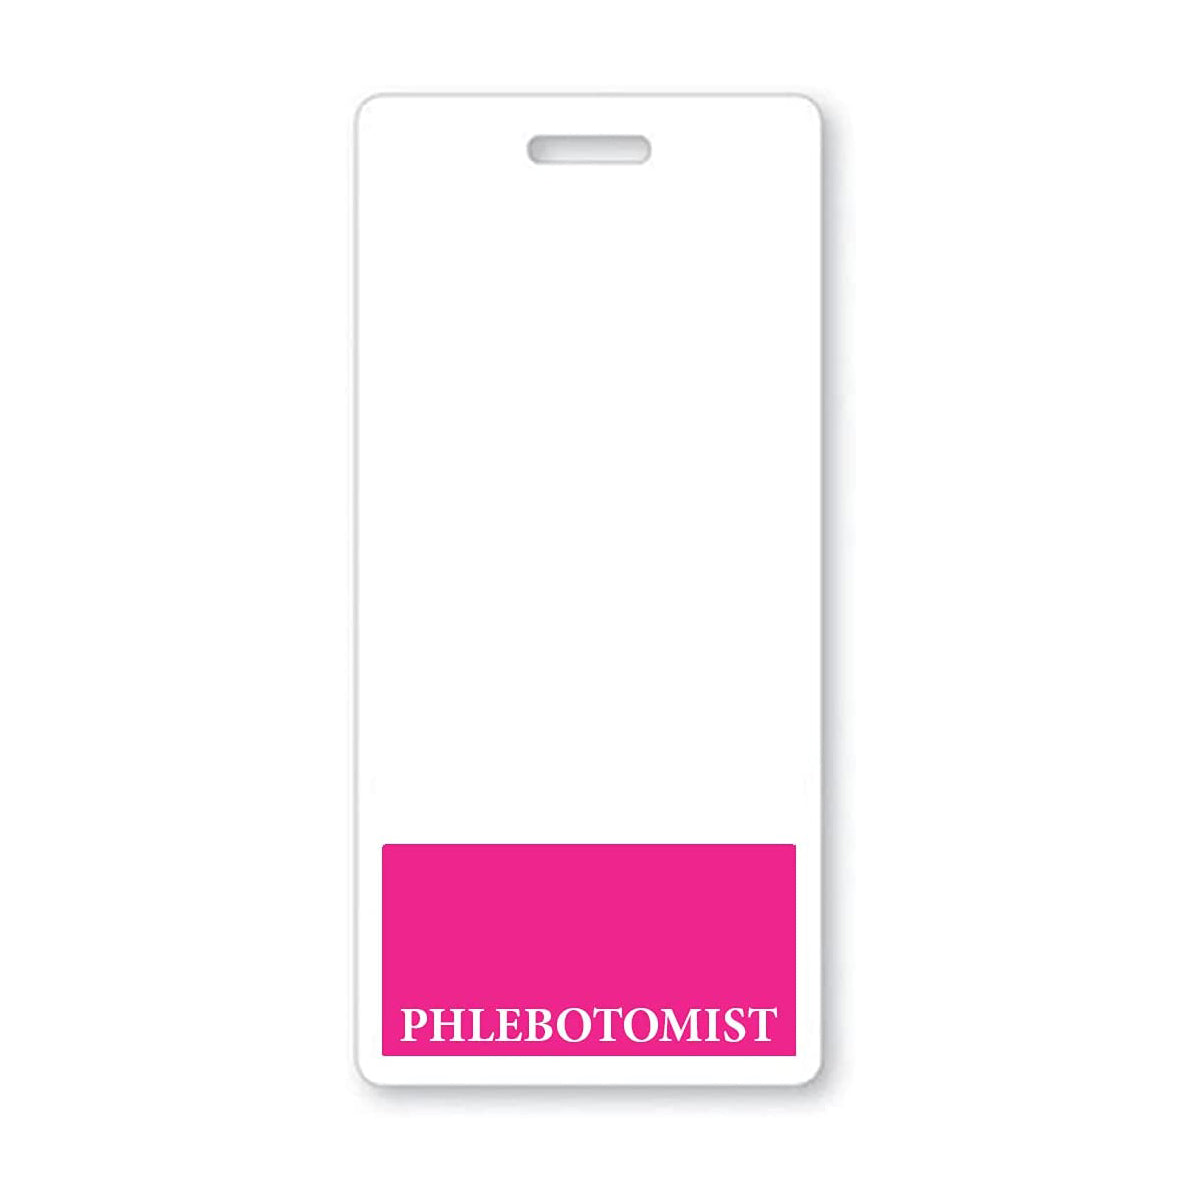 Phlebotomist Badge Buddy Vertical with Pink Border